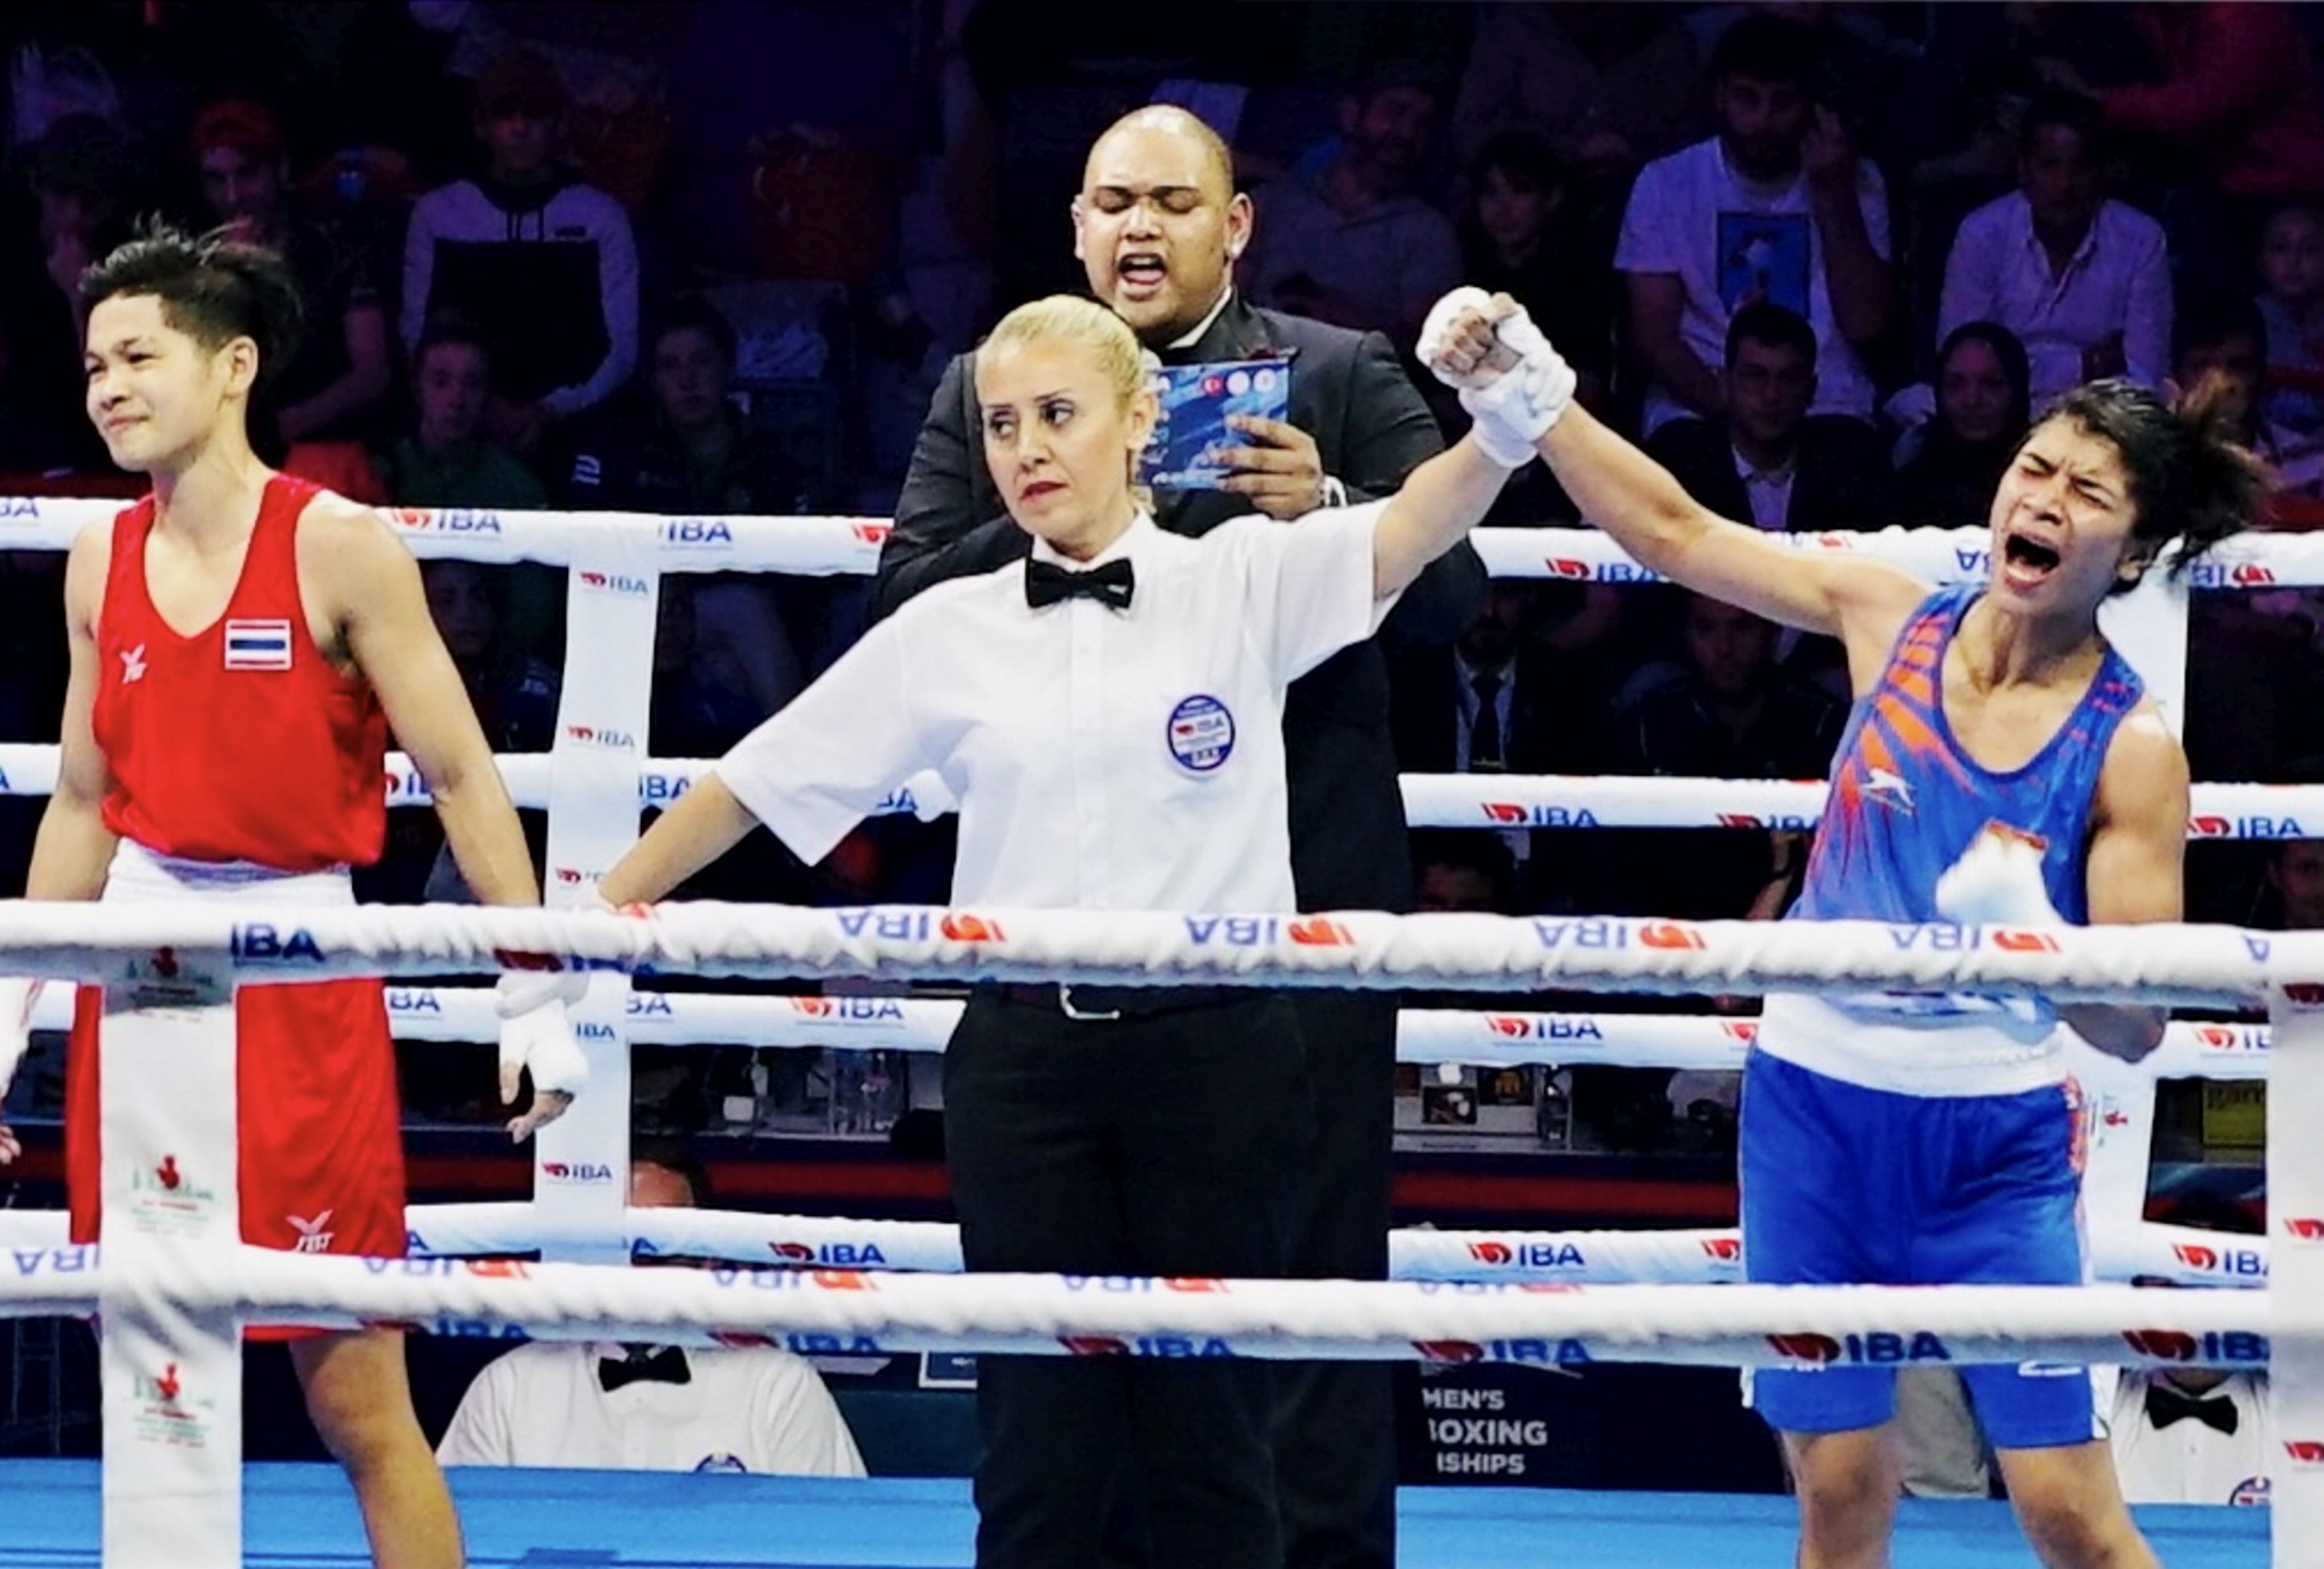 Zareen becomes world champion, only fifth Indian woman boxer to achieve feat